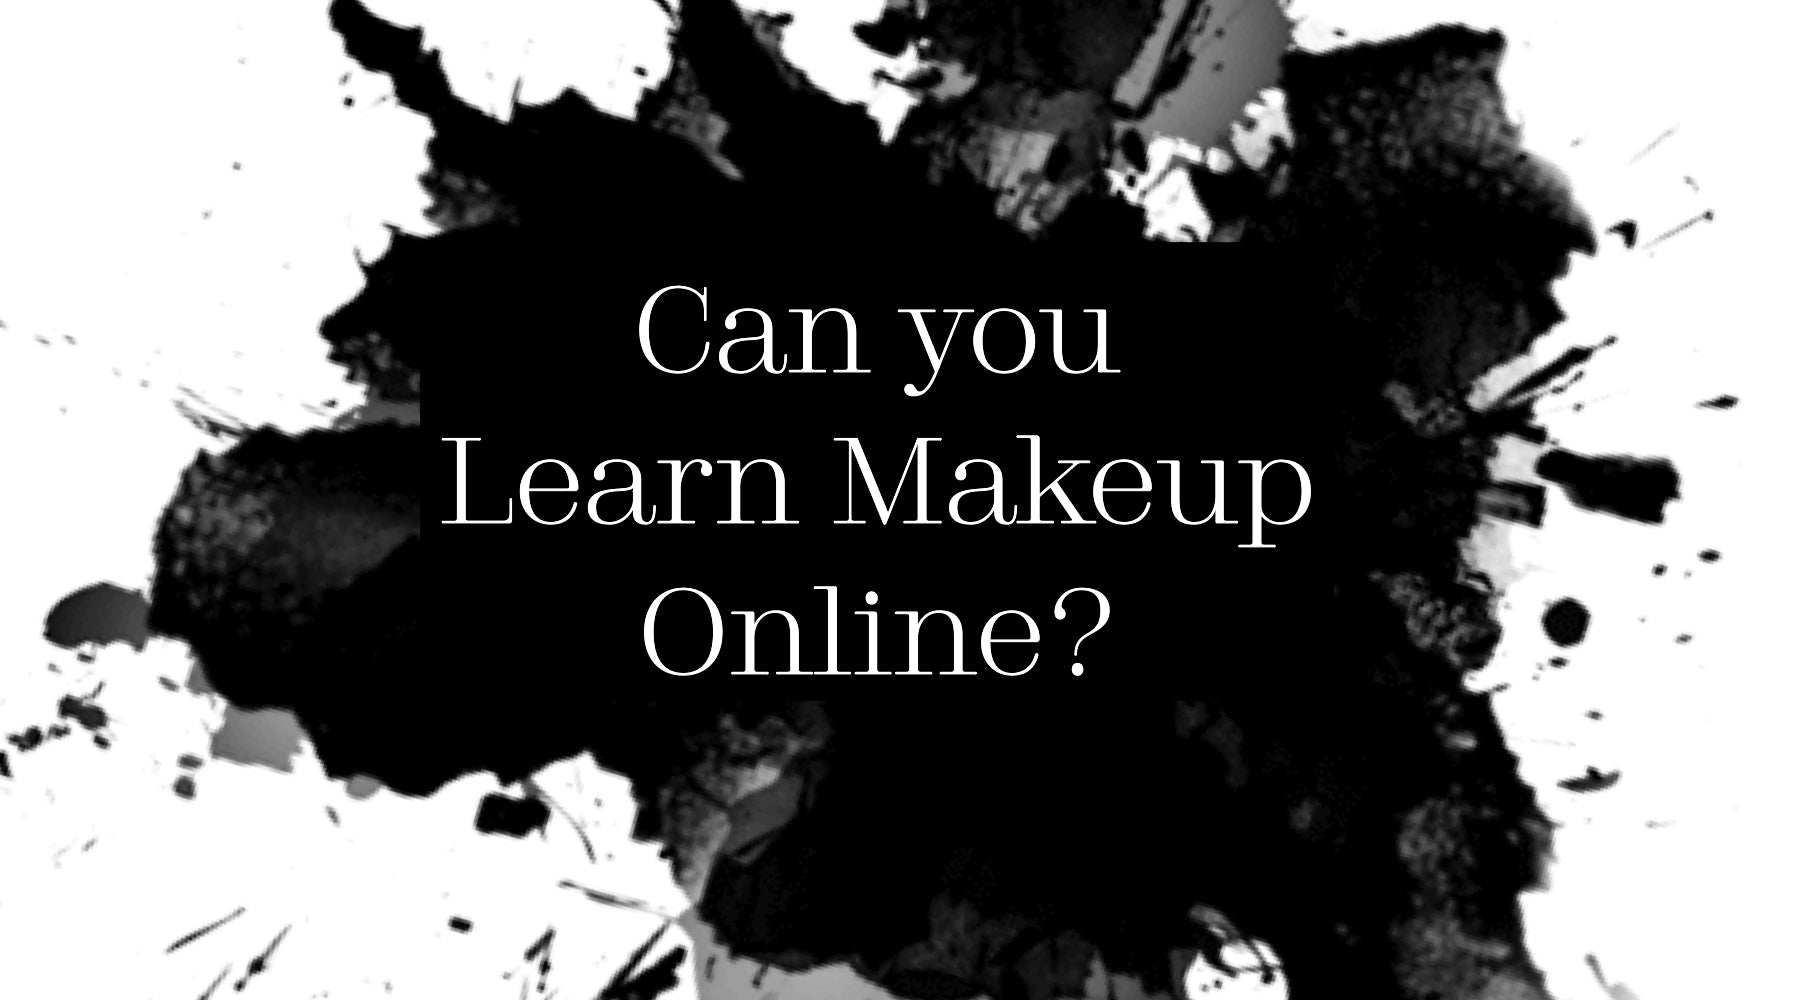 Can You Learn Makeup Online?